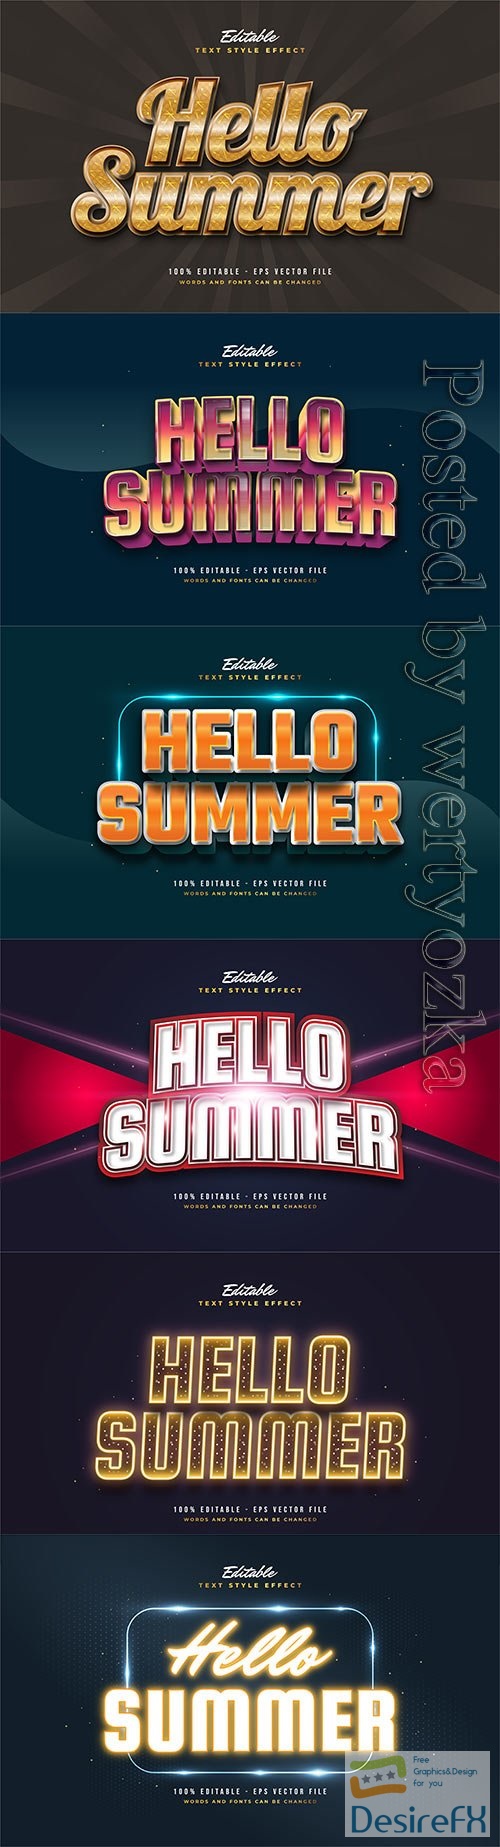 Hello summer 3d editable text style effect in vector vol 12